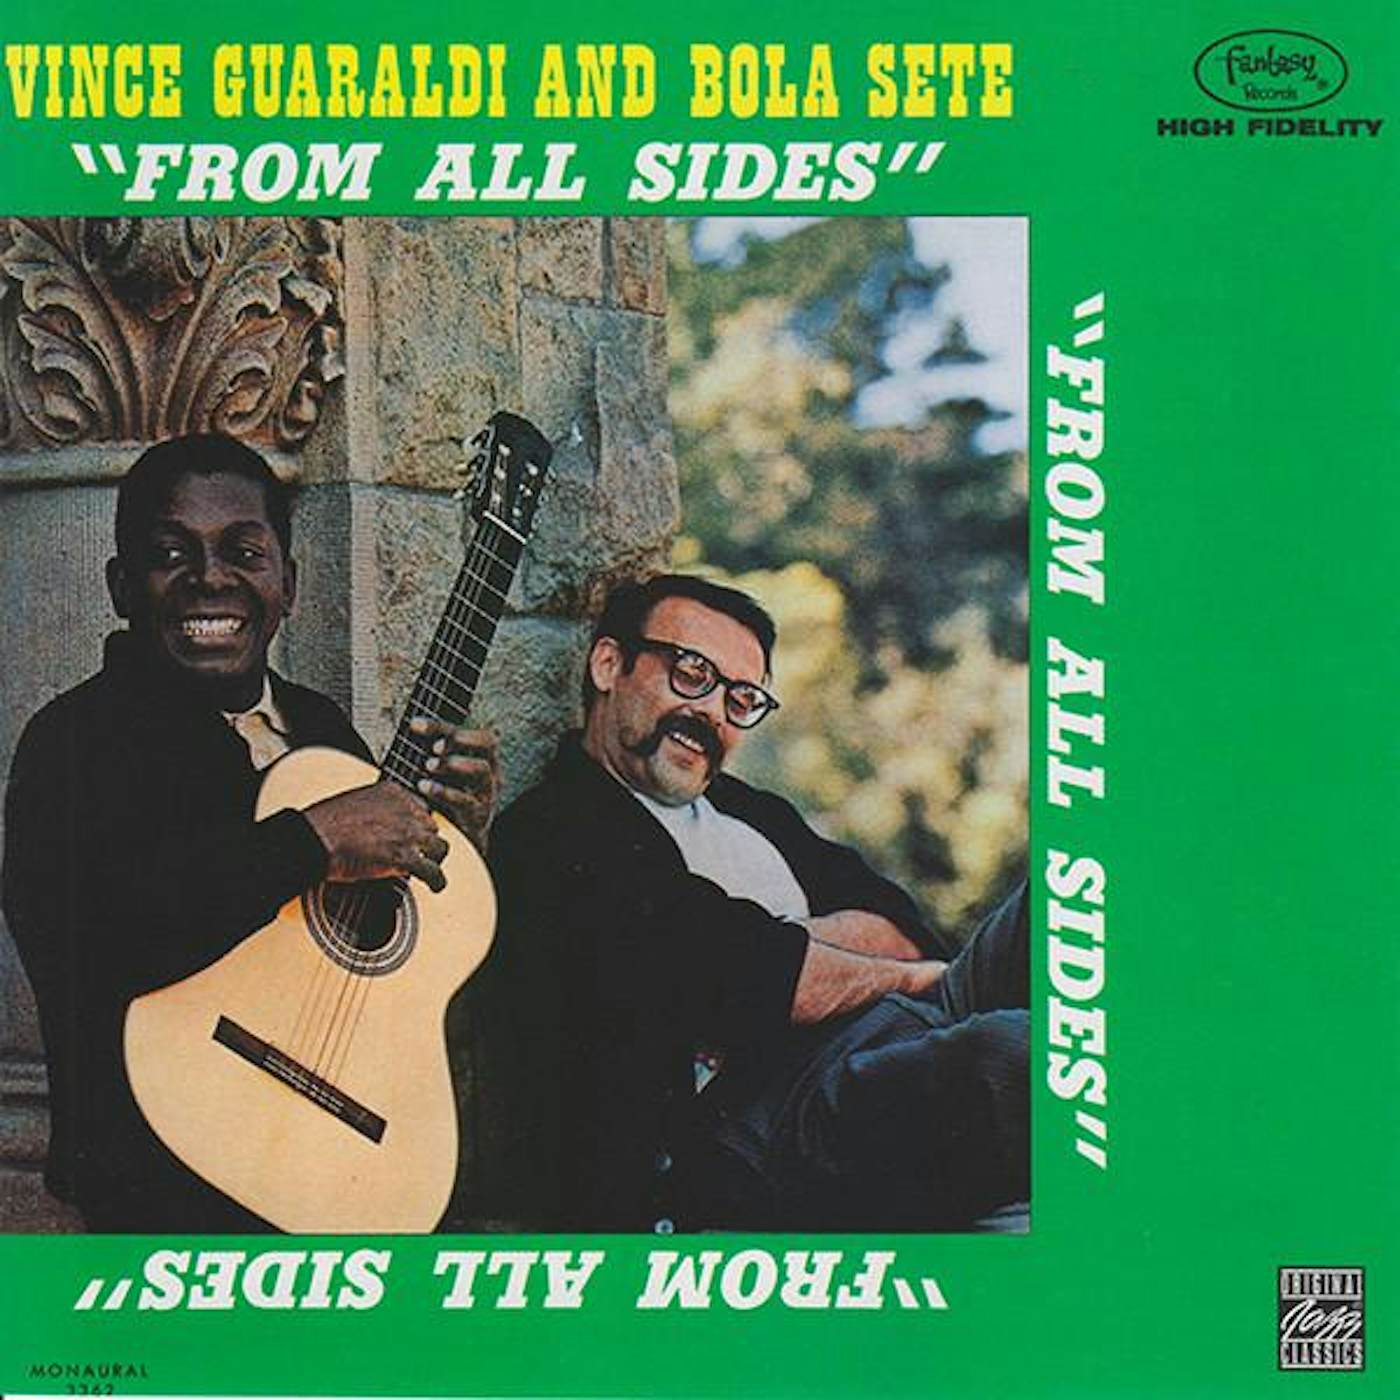 Vince Guaraldi FROM ALL SIDES CD